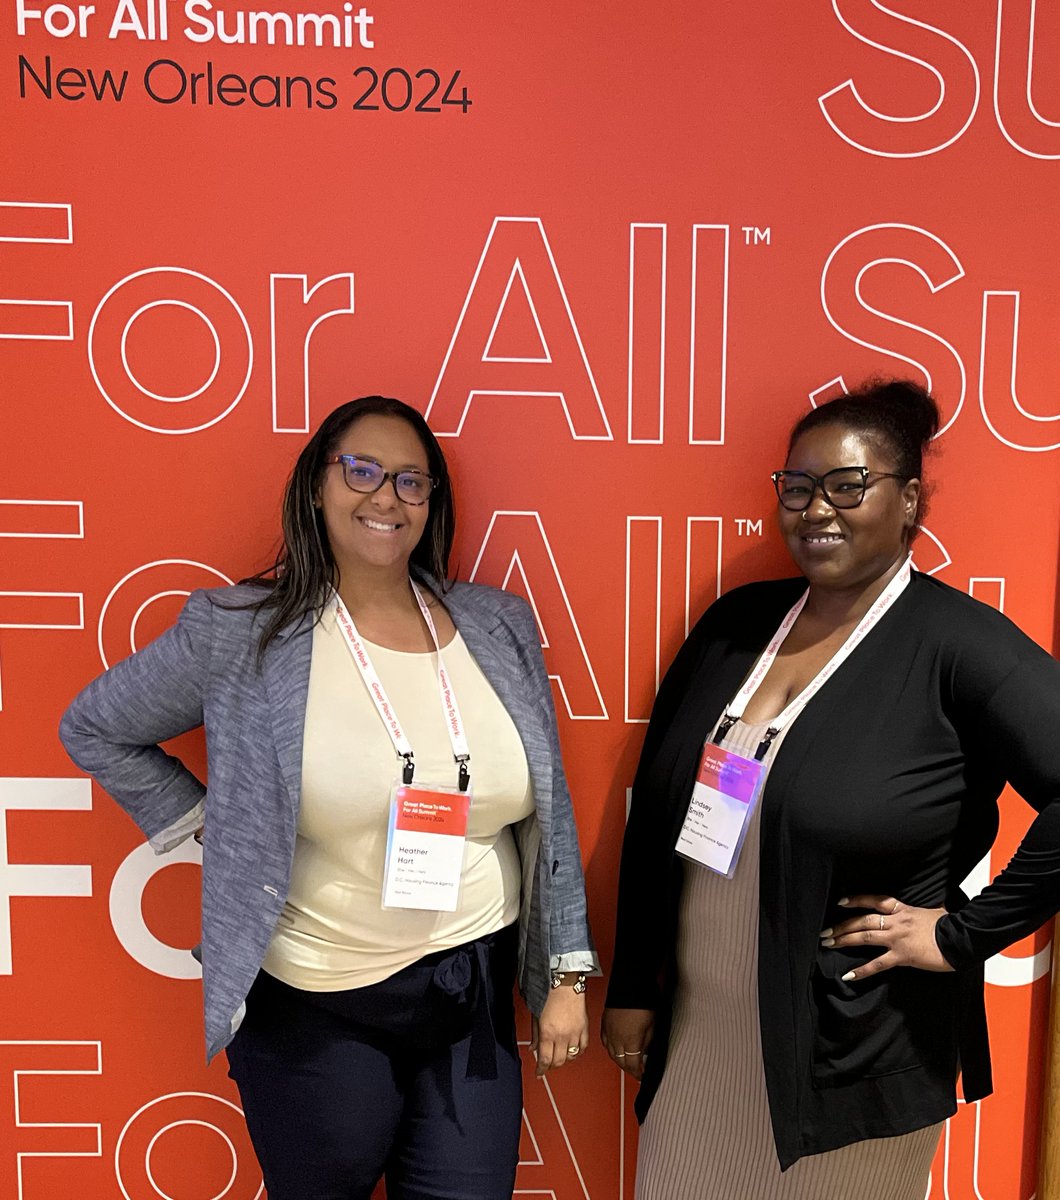 DCHFA’s Human Resources team attended the #GreatPlaceToWork Summit to learn about new solutions, strategies, and best practices to implement as a thought leader in HR. @GPTW_US #DCHFA45 #WeAreDCHFA